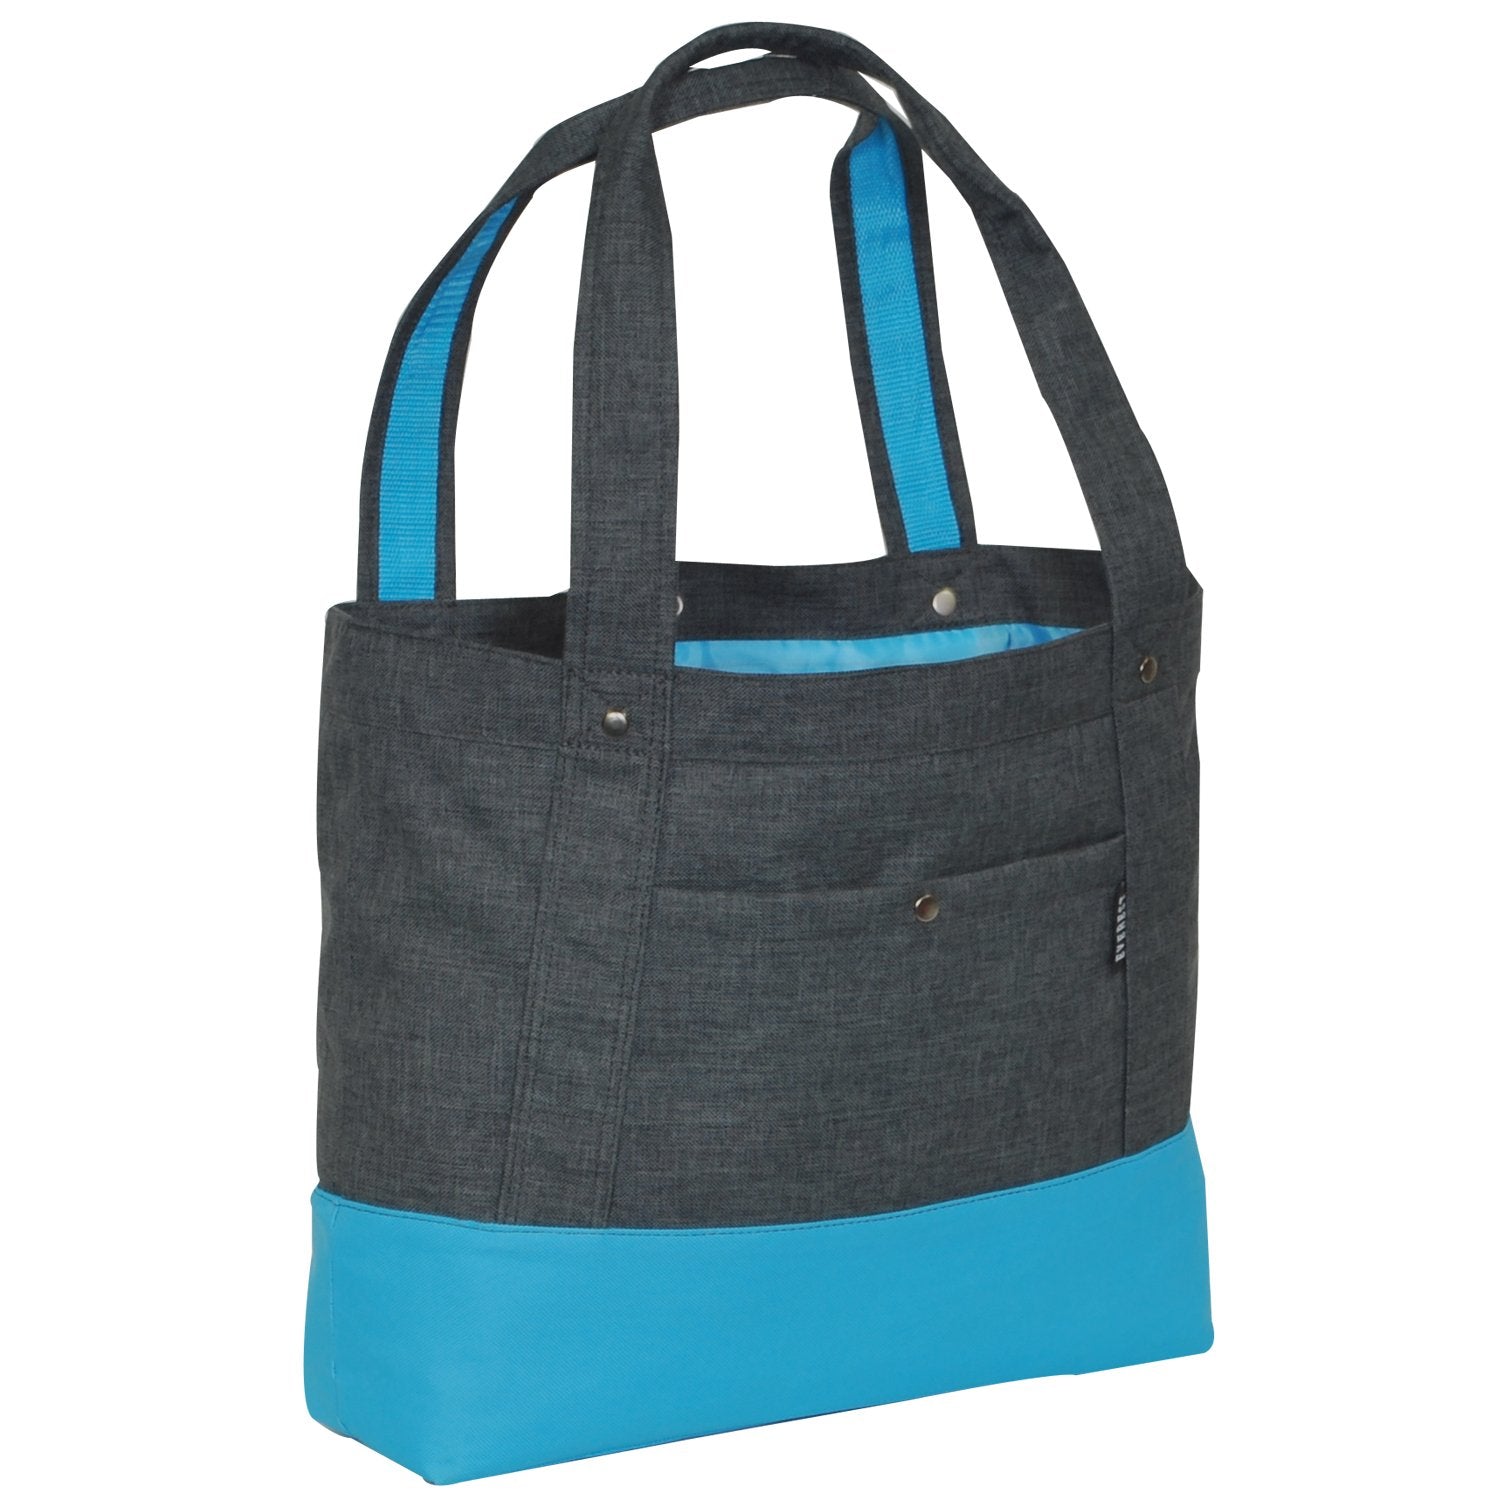 Everest-Stylish Tablet Tote Bag-eSafety Supplies, Inc